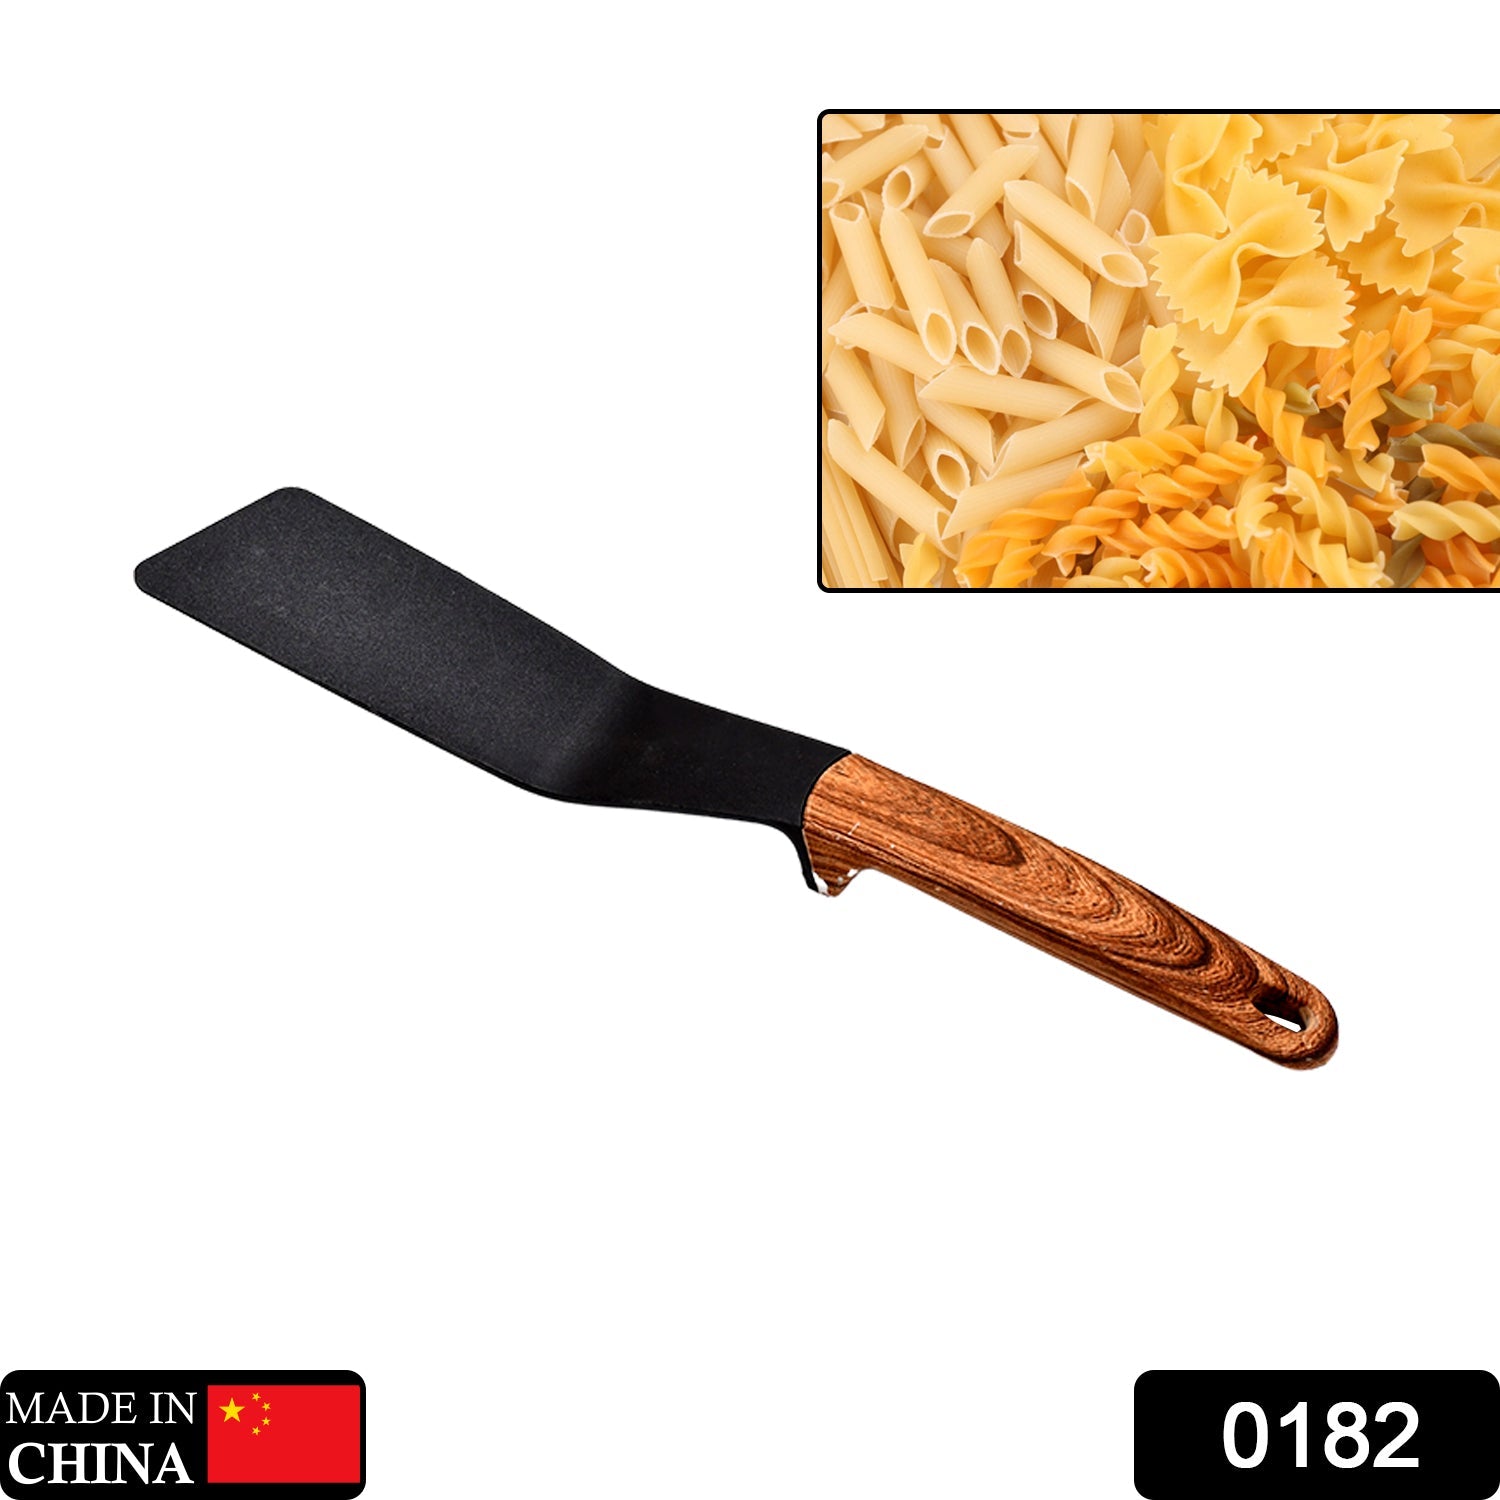 0182 tylish Kitchen Tool, Flexible Non Stick Heat Resistant Nylon Spatula, Wooden Handle Cooking Curved Turner for Salada, Fish, Eggs, Panakes DeoDap